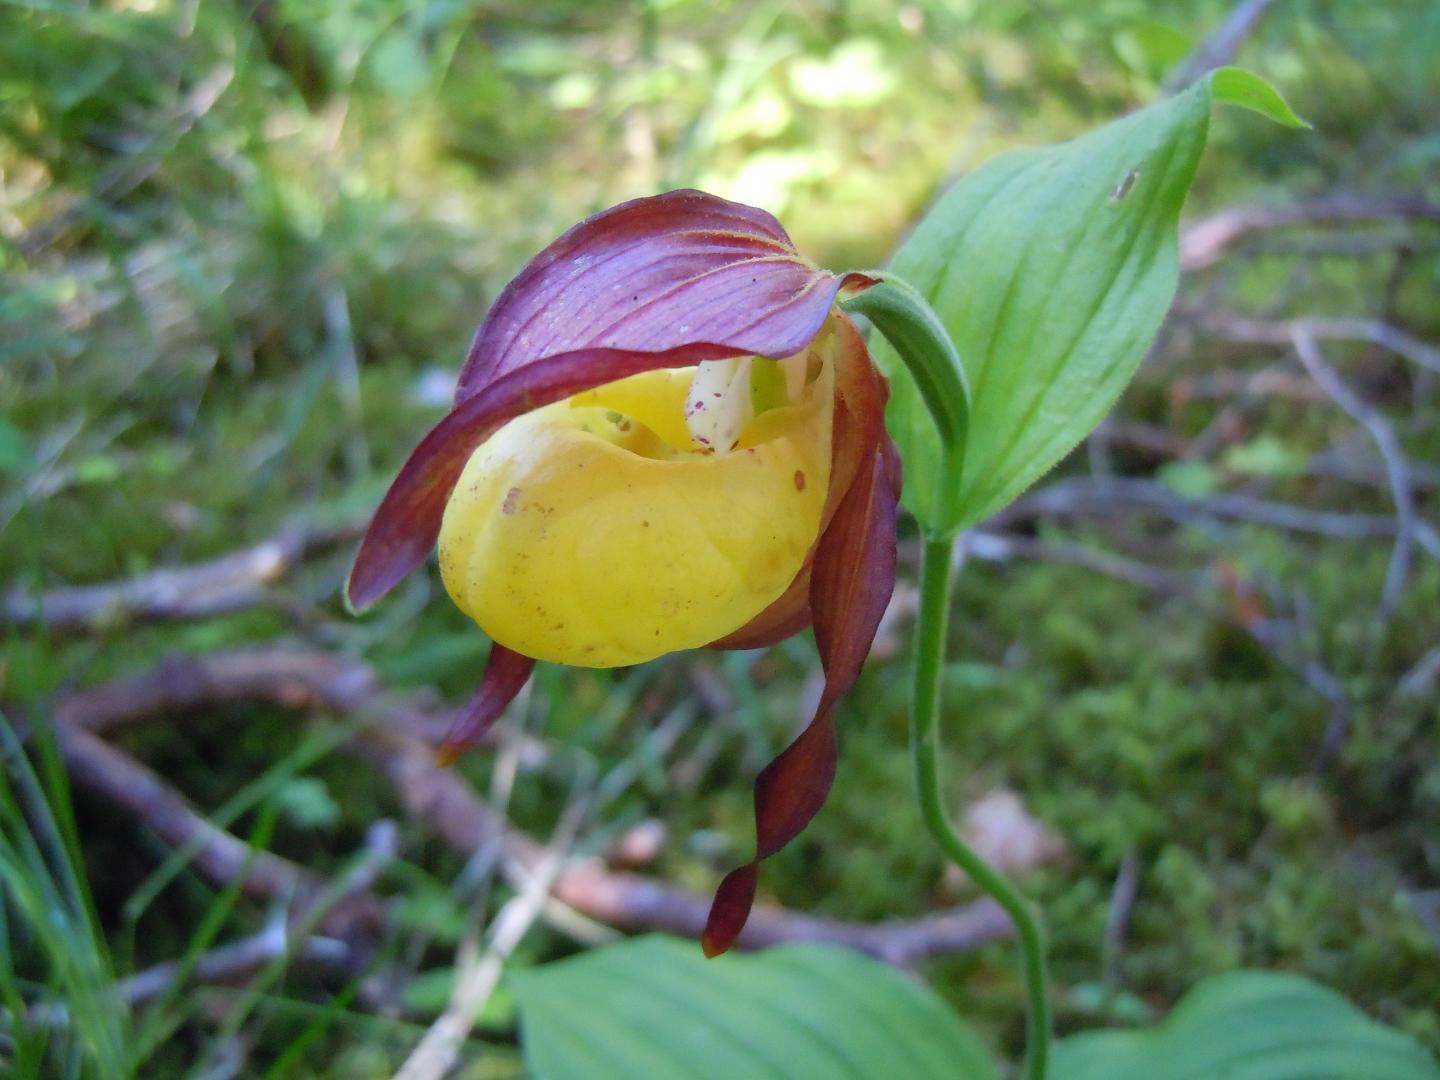 A Lady's Slipper Orchid